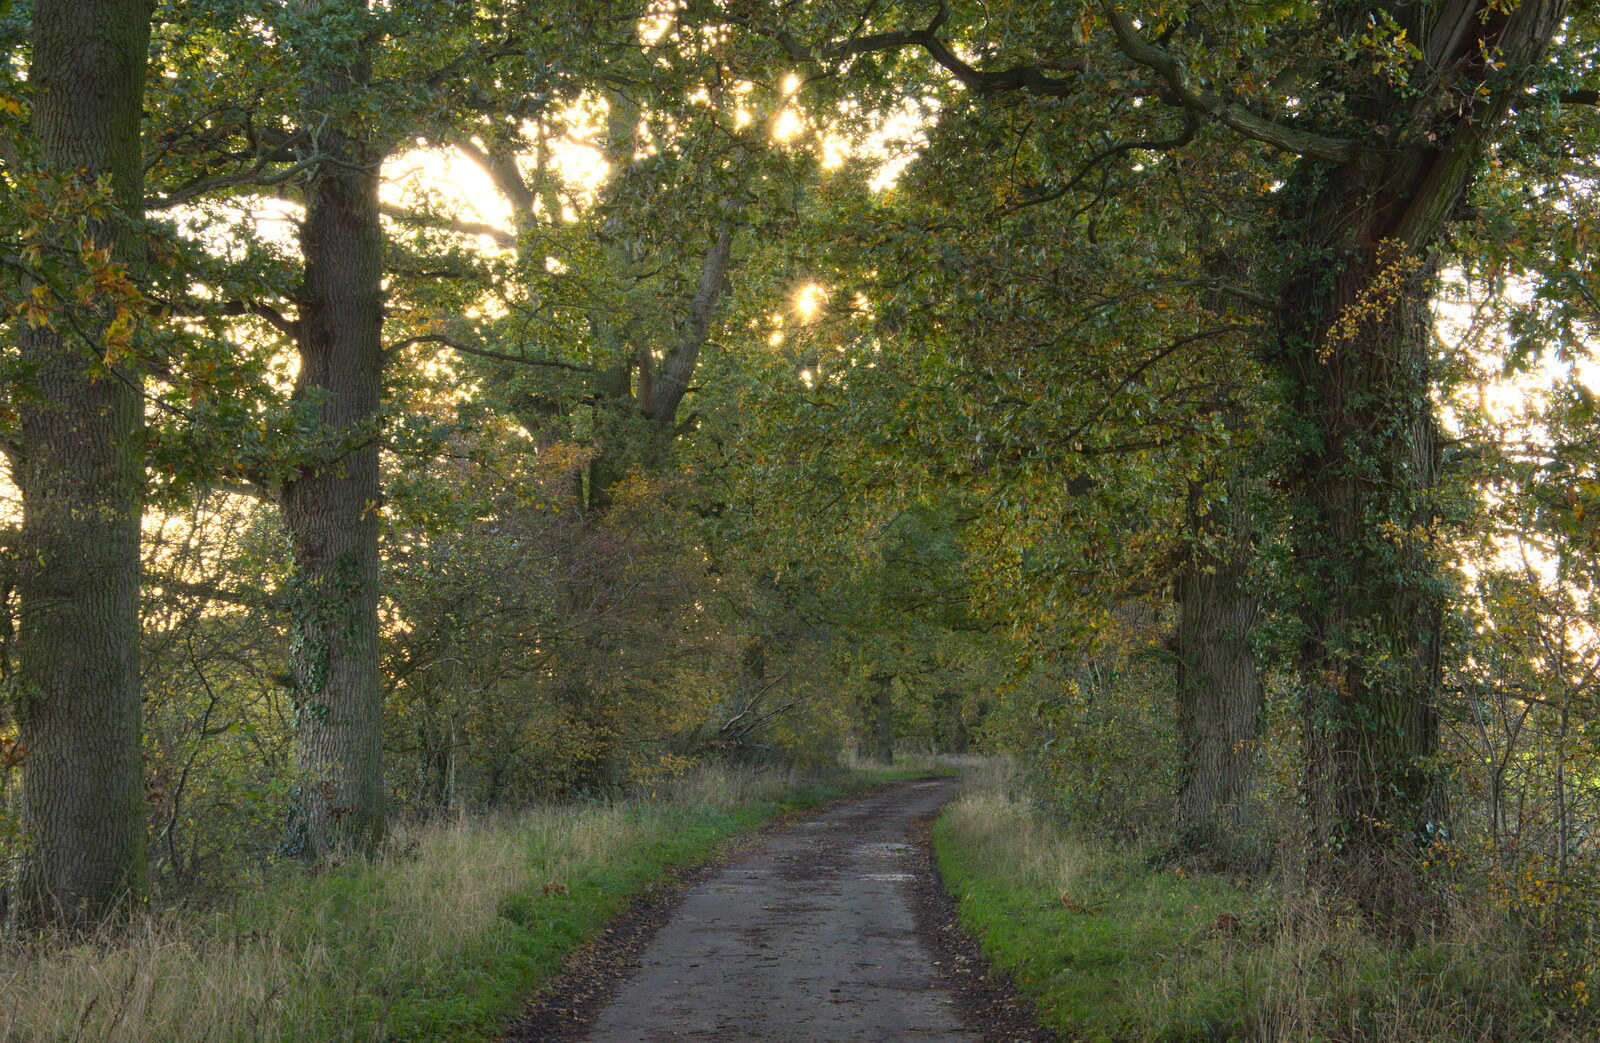 Brome Avenue from A Walk Around the Avenue, Brome, Suffolk - 25th October 2020